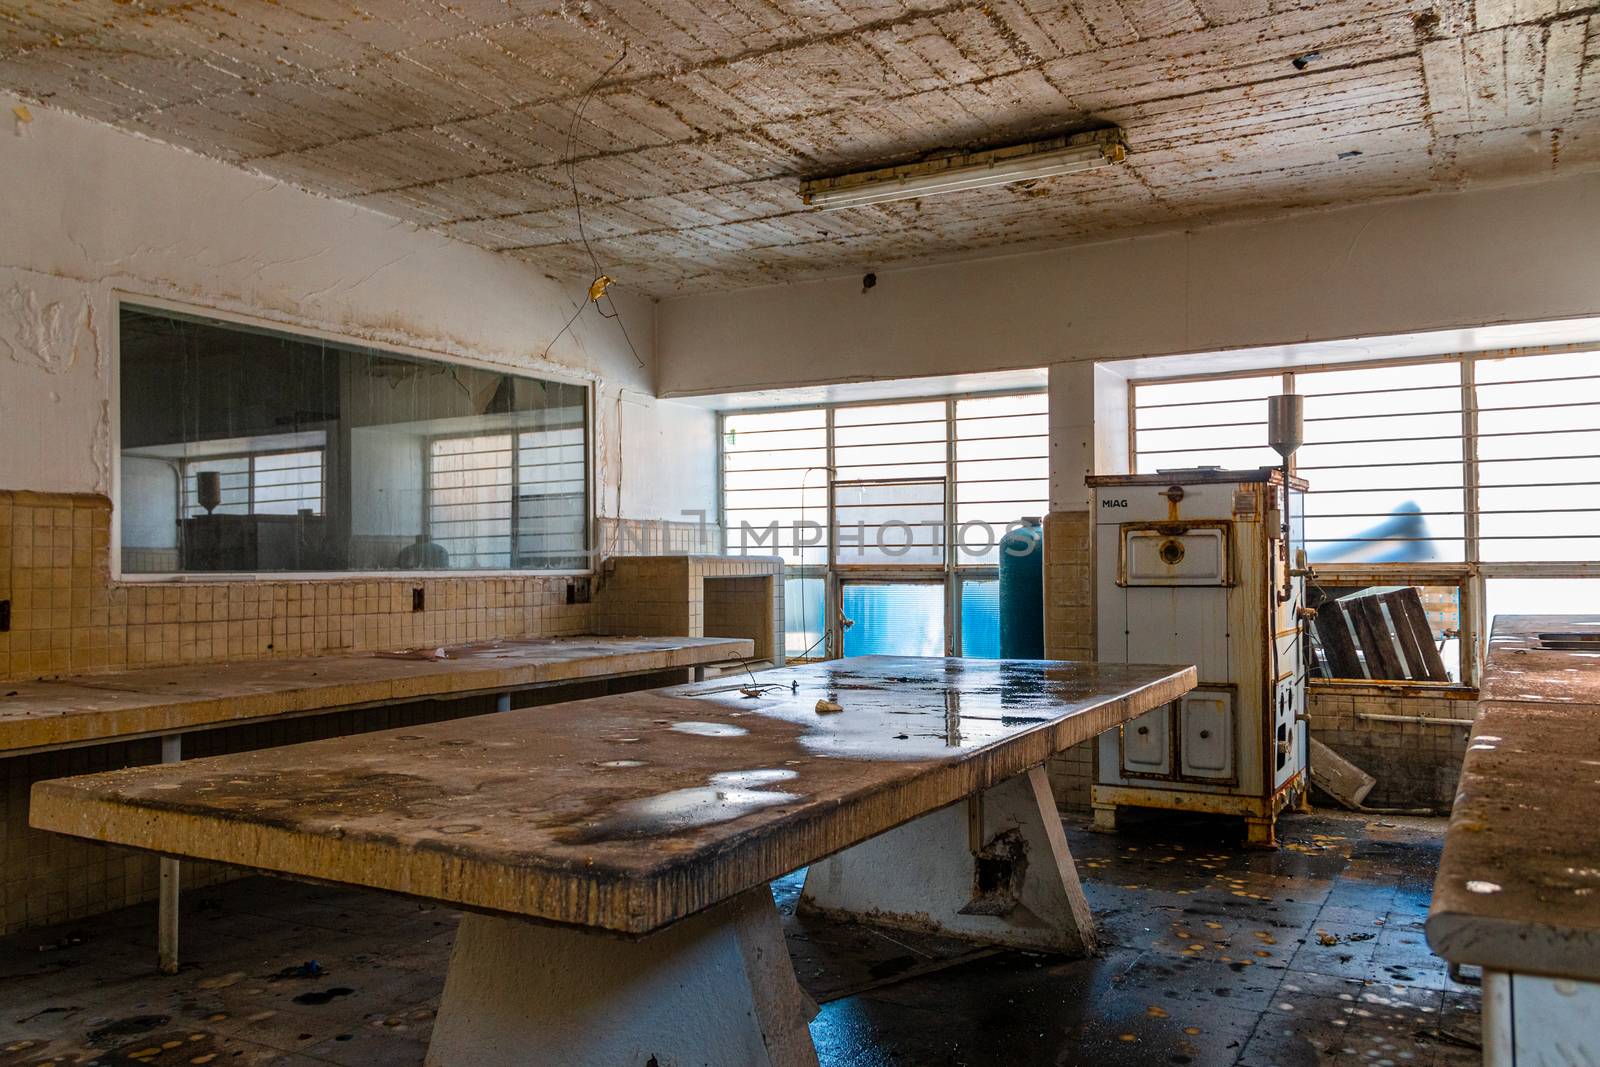 Chemistry laboratory in abandoned school with examination table in the center. by leo_de_la_garza